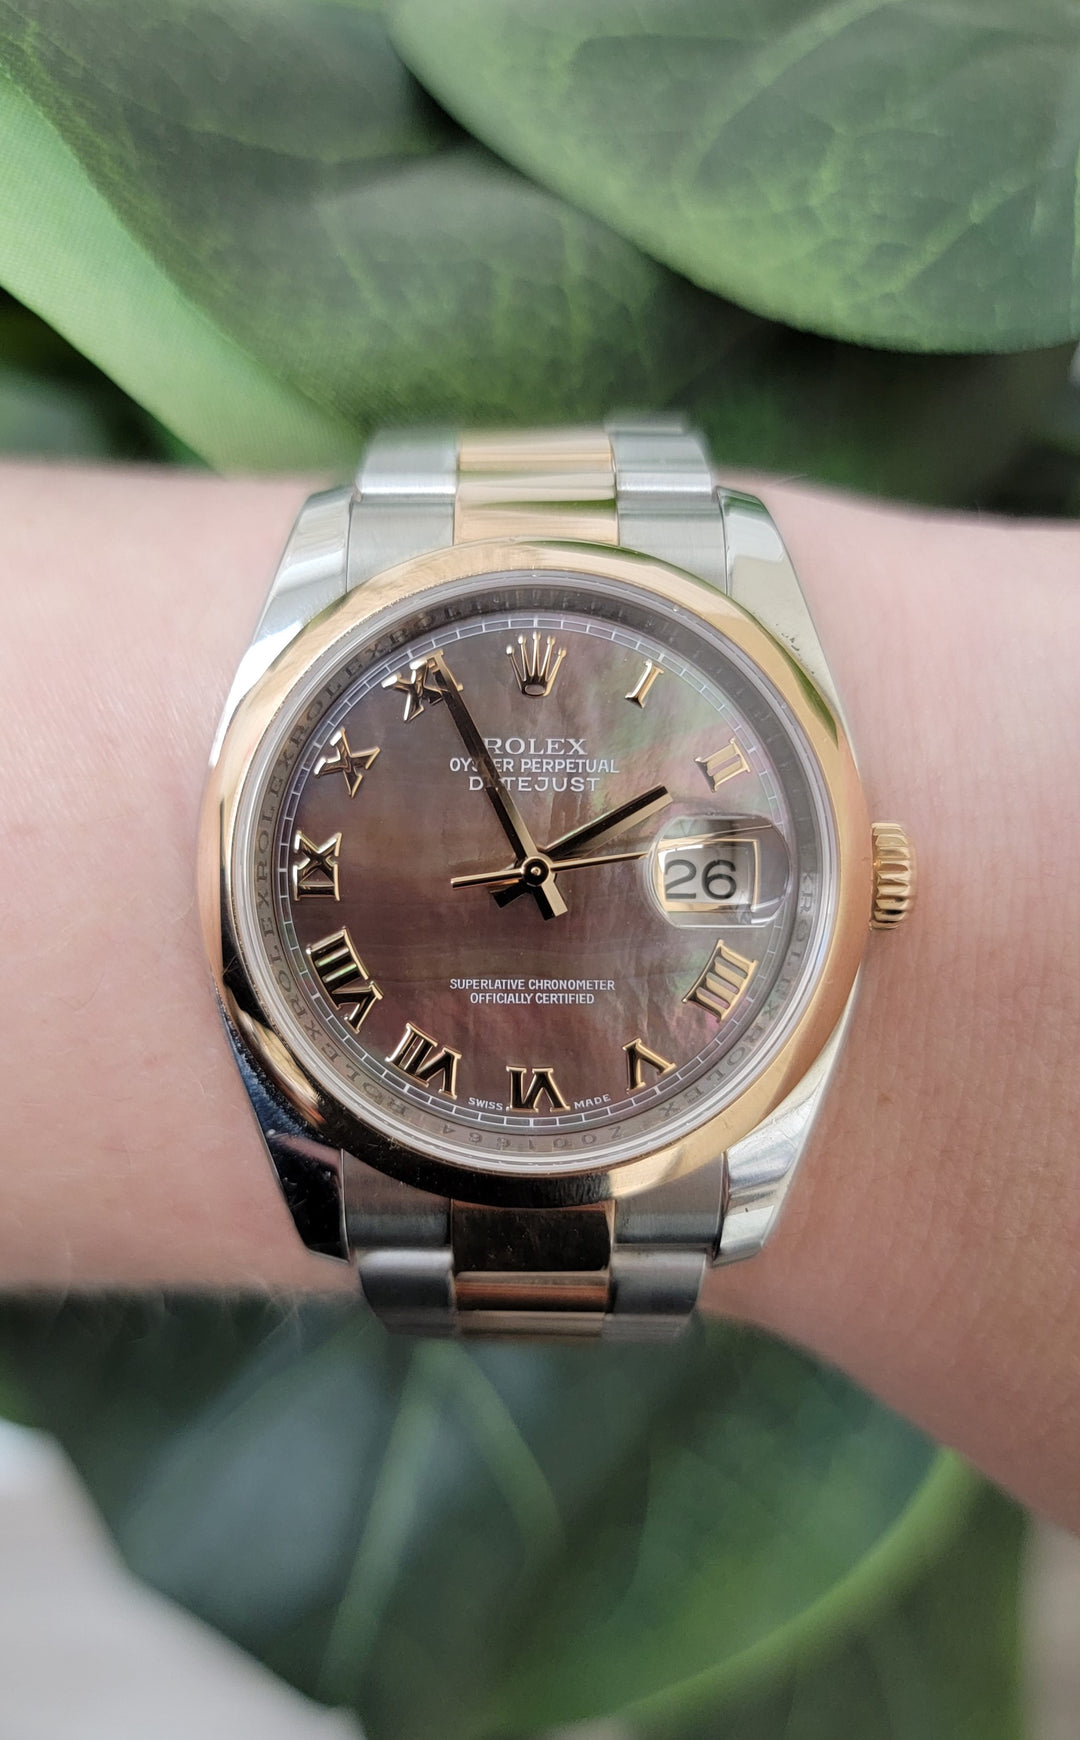 Rolex Datejust 36mm Tahitian MOP Dial in Two-tone Everose & Stainless Steel Watch